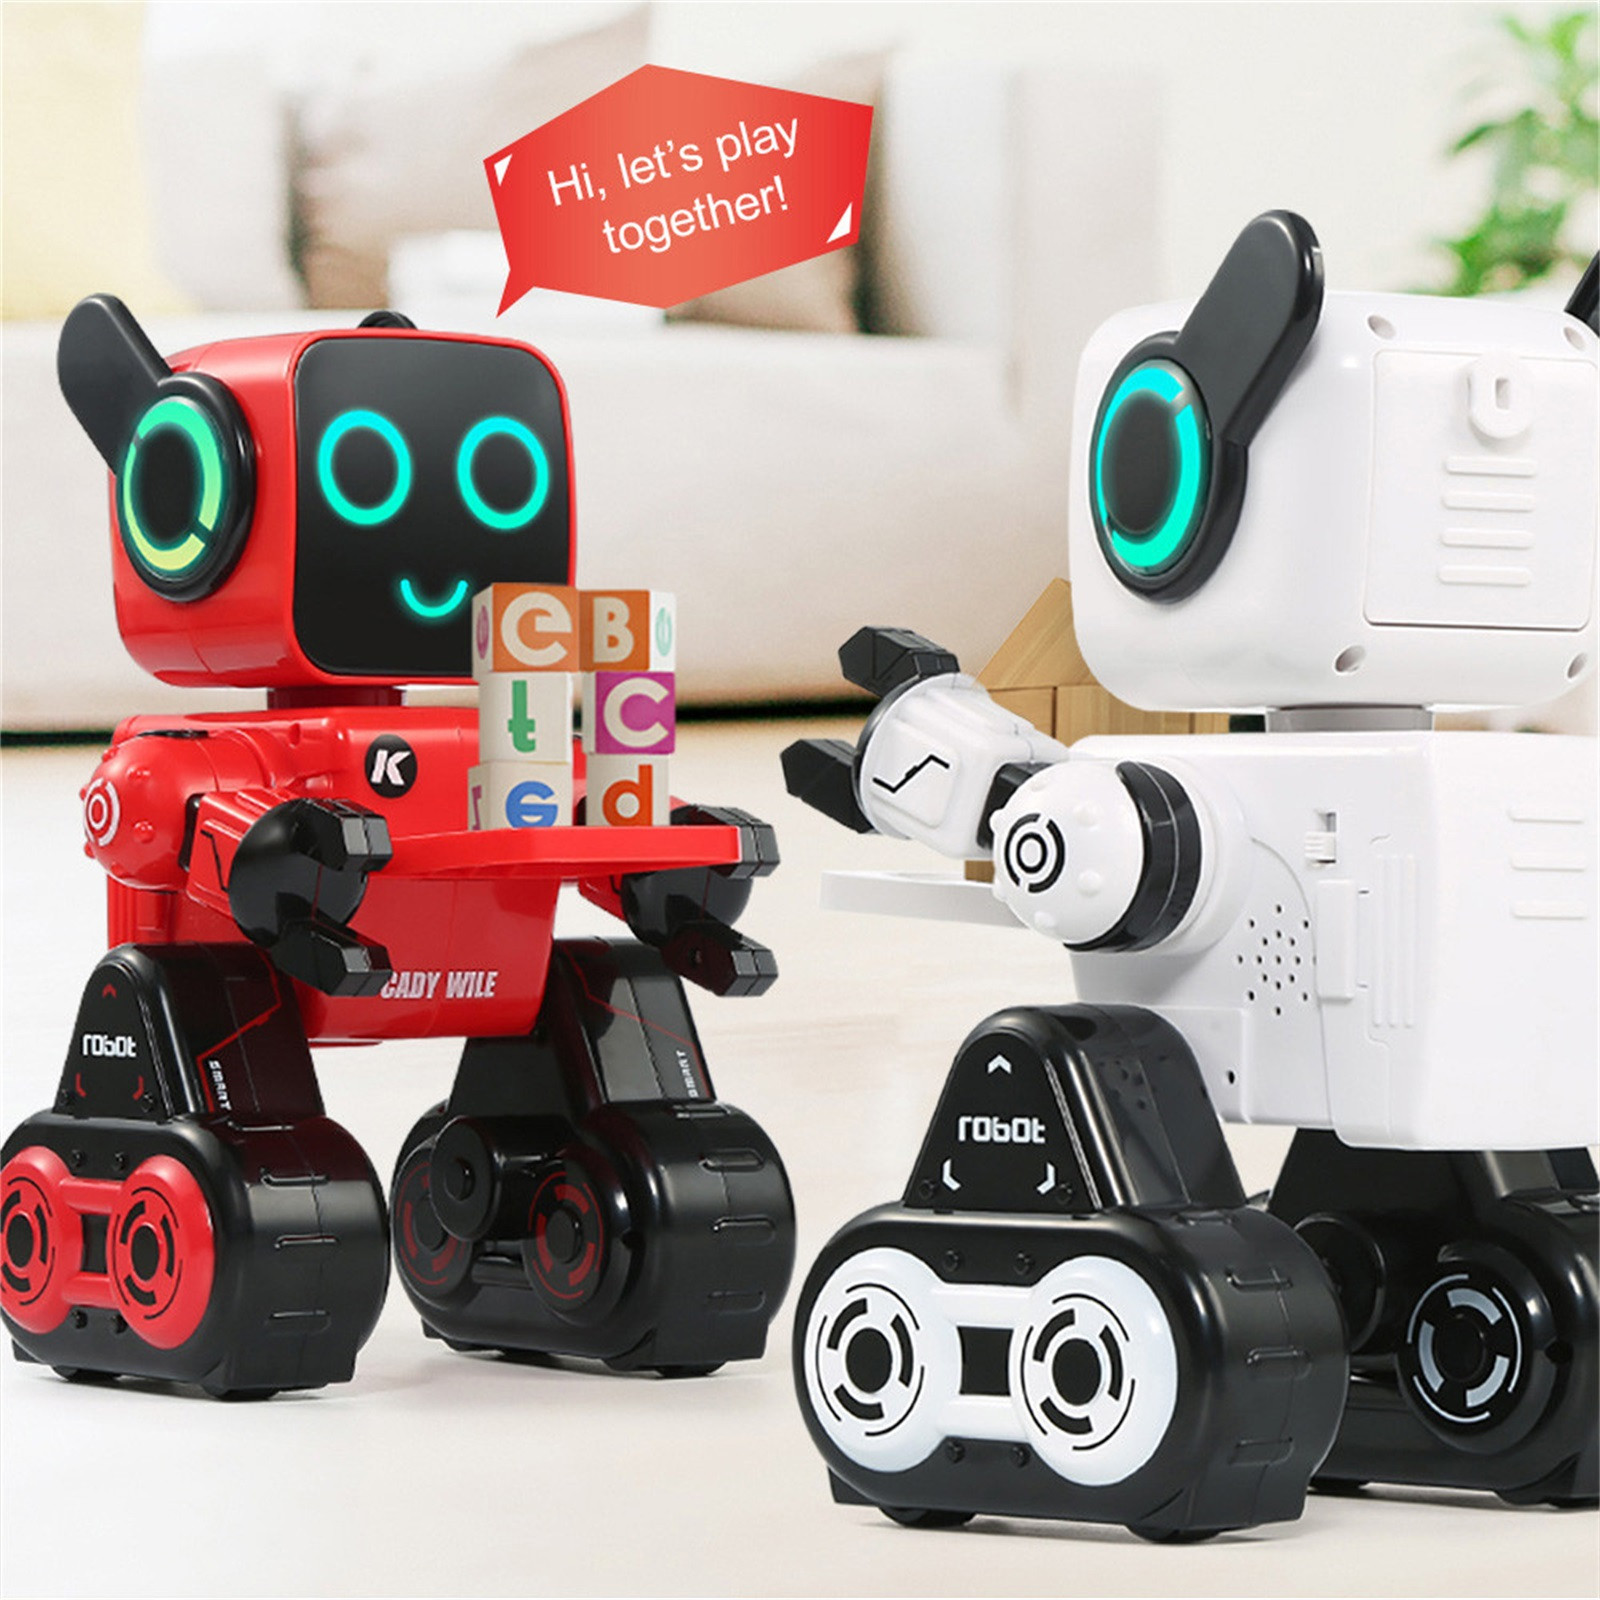 Rc Robot For Jjr/c R4 Cady Wile 2.4g Intelligent Remote Control Advisor Coin Bank Smart Robot Working Robots Toys Kids Gift